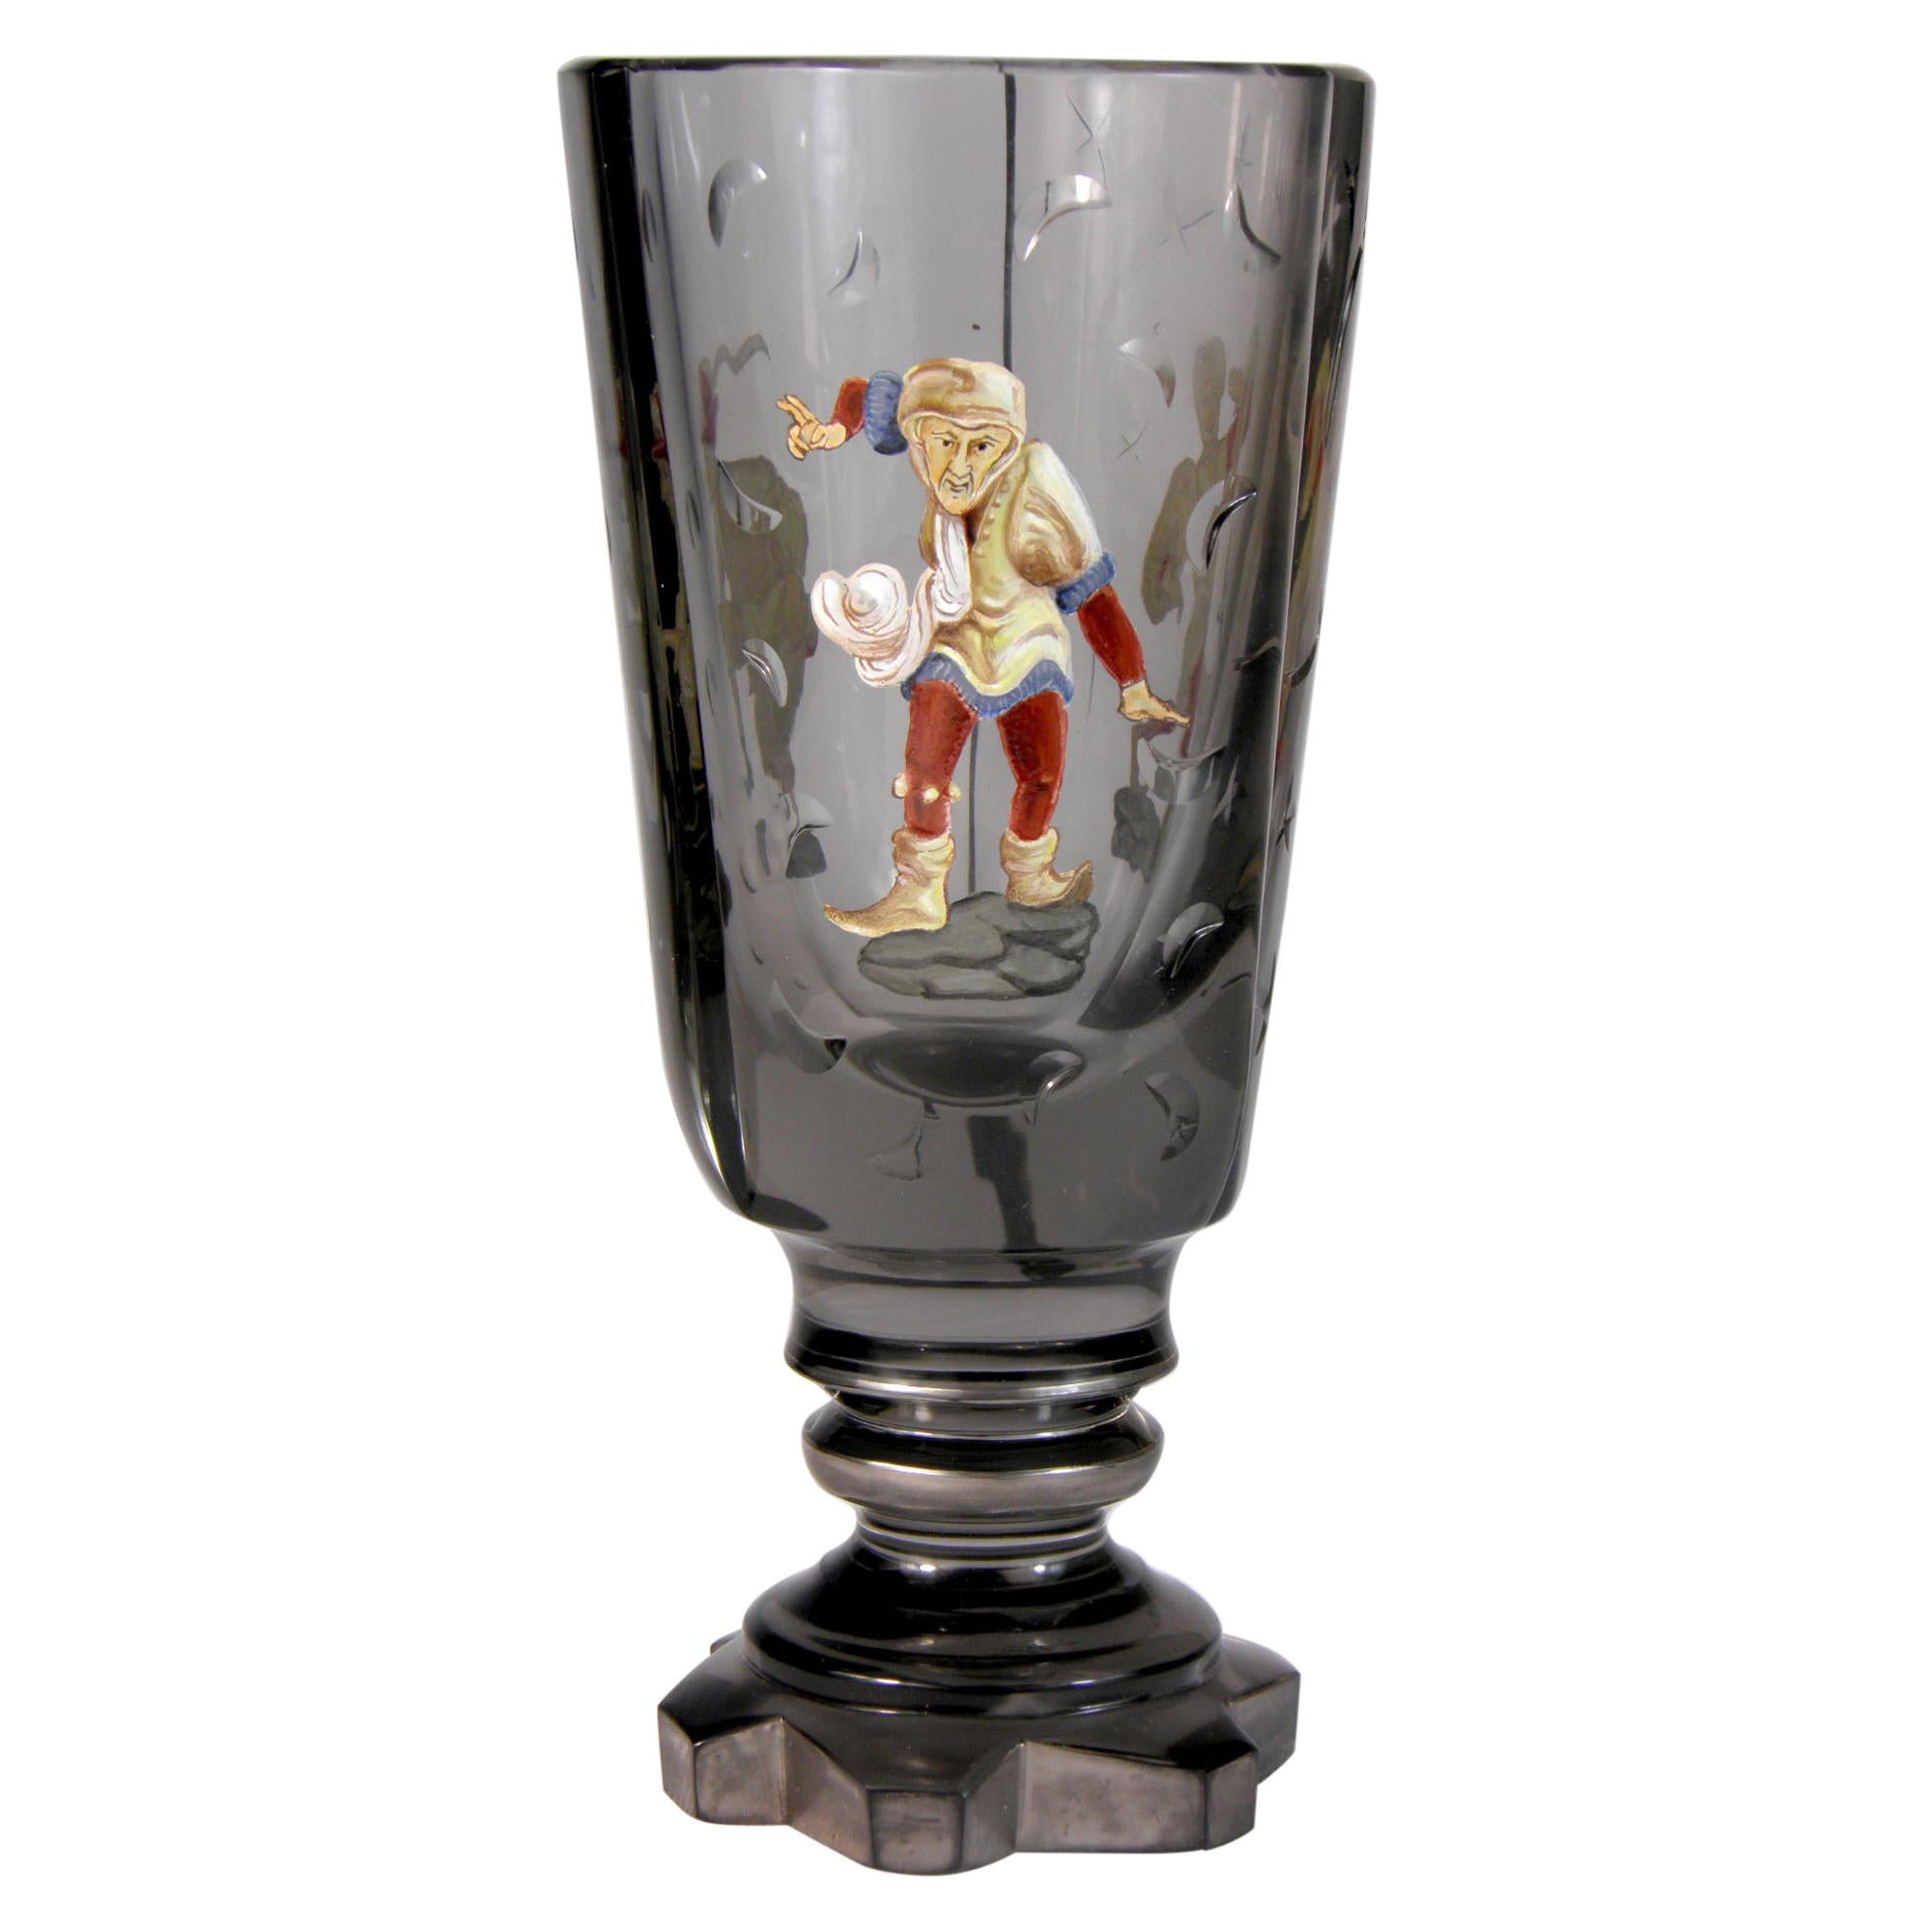 Cut, Engraved and Painted Goblet in Art Deco Style, France